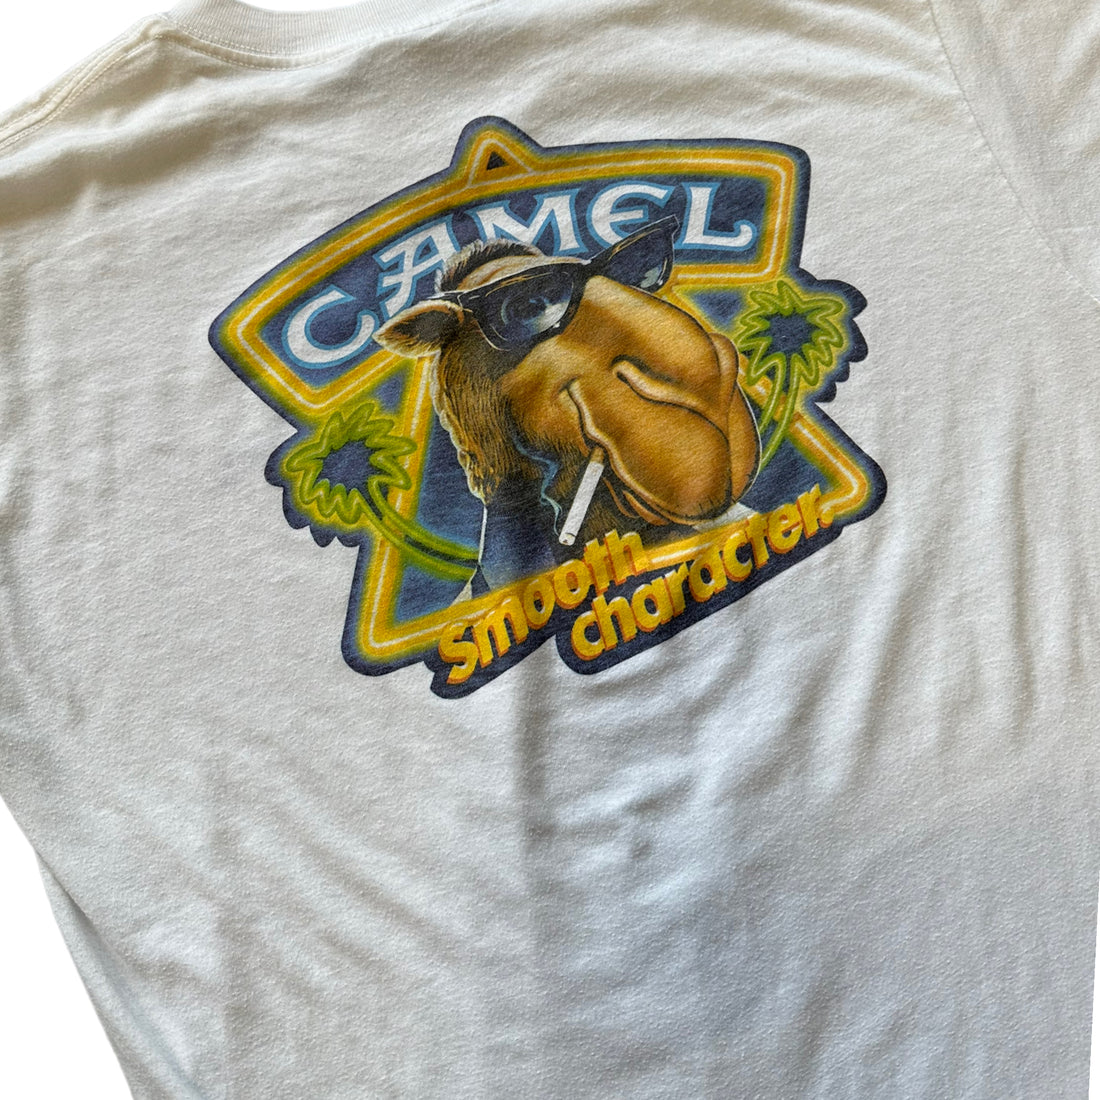 CAMEL “SMOOTH CHARACTER” T-SHIRT WHITE ‘XL’ - 1980S